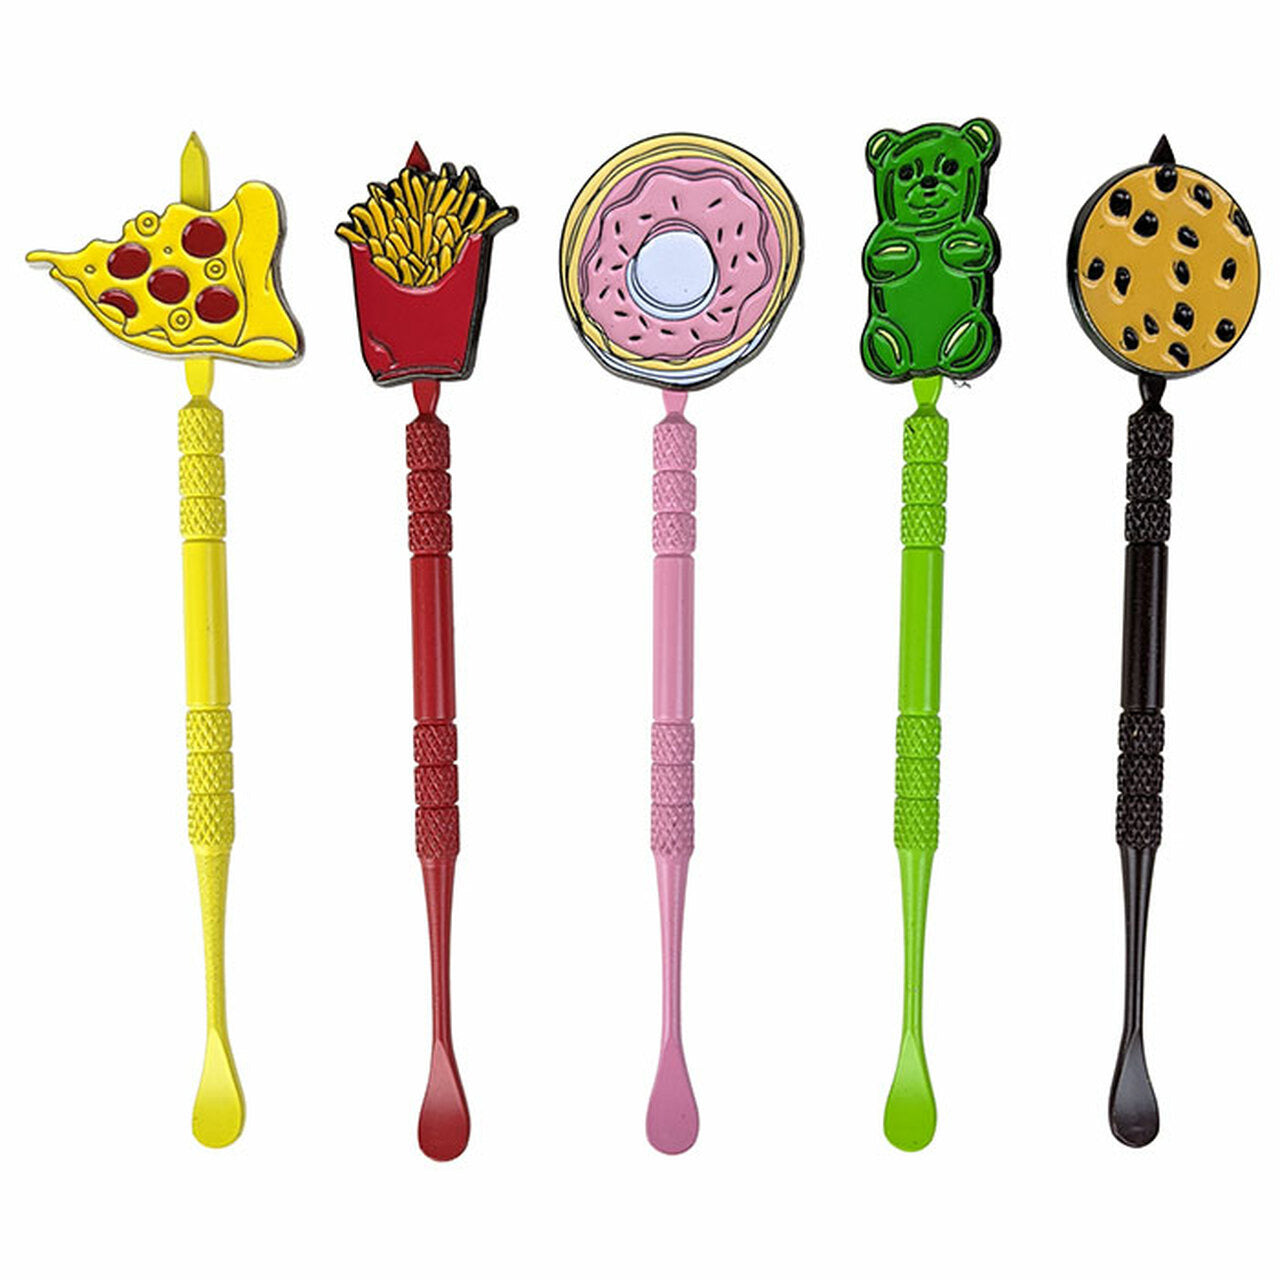 The Munchies Dabber - Dab Tool Ugly house